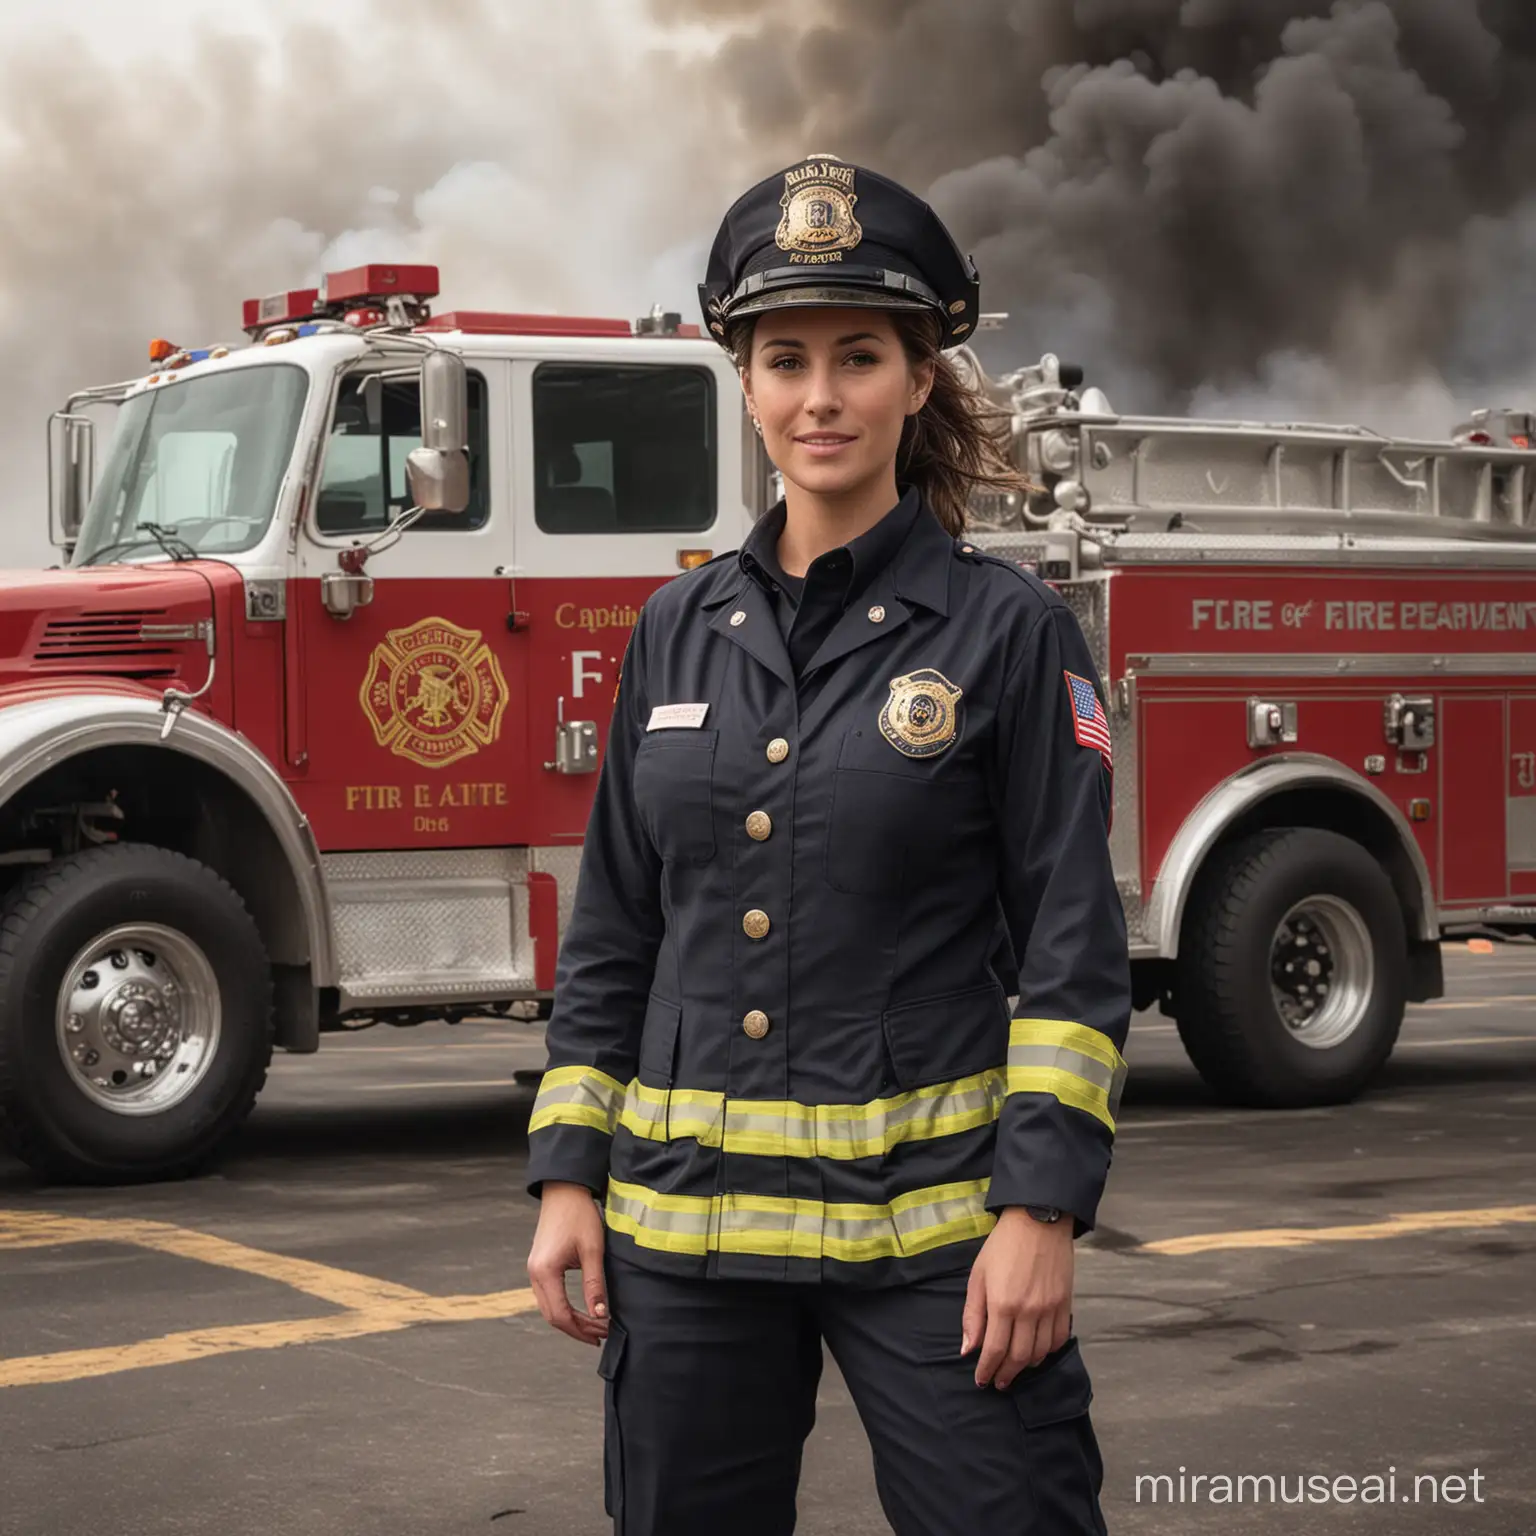 Female Captain Leading the Fire Department